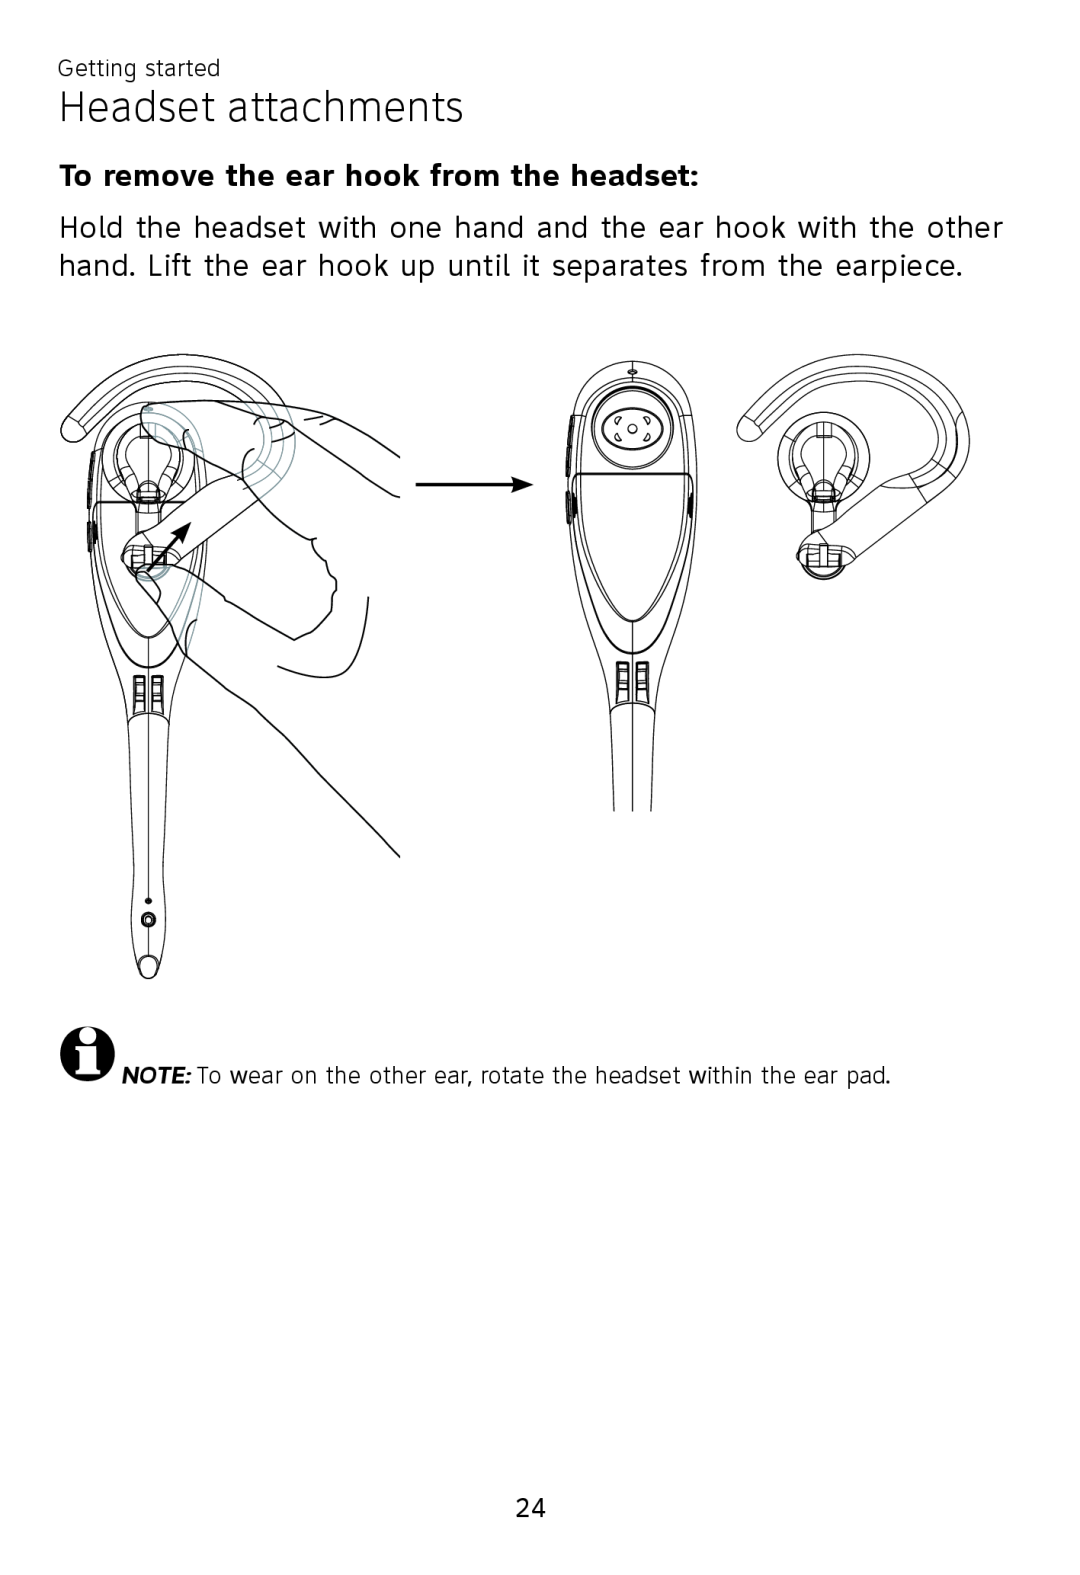 AT&T TL 7610 user manual To remove the ear hook from the headset, Headset attachments, Getting started 